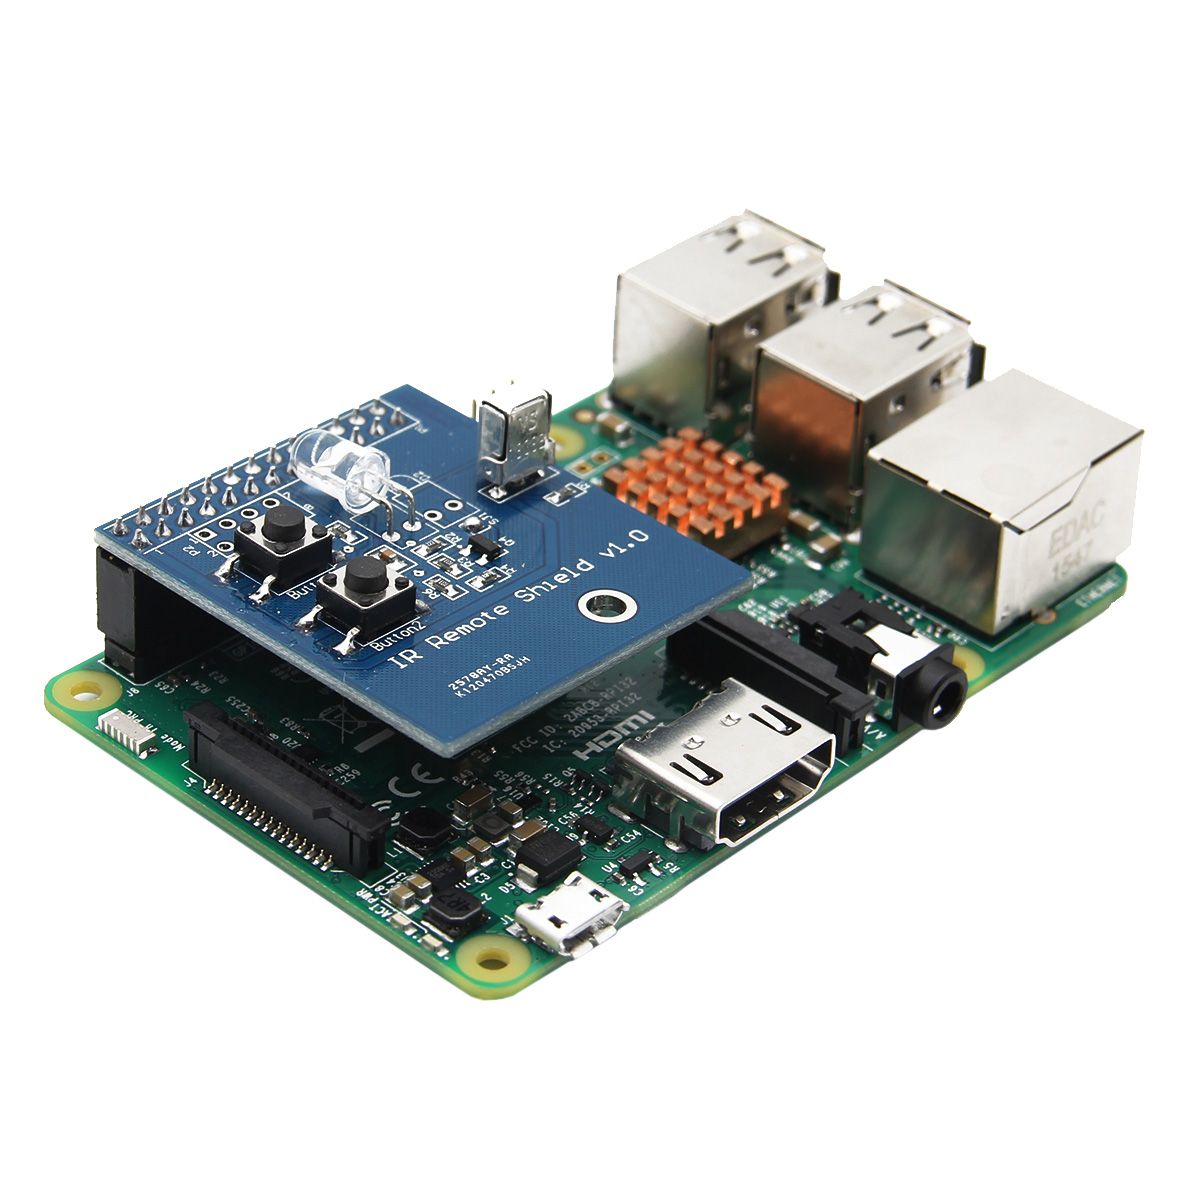 IR-Infrared-Receiver-and-Transmitter-Expansion-Board-For-Raspberry-Pi-1102753